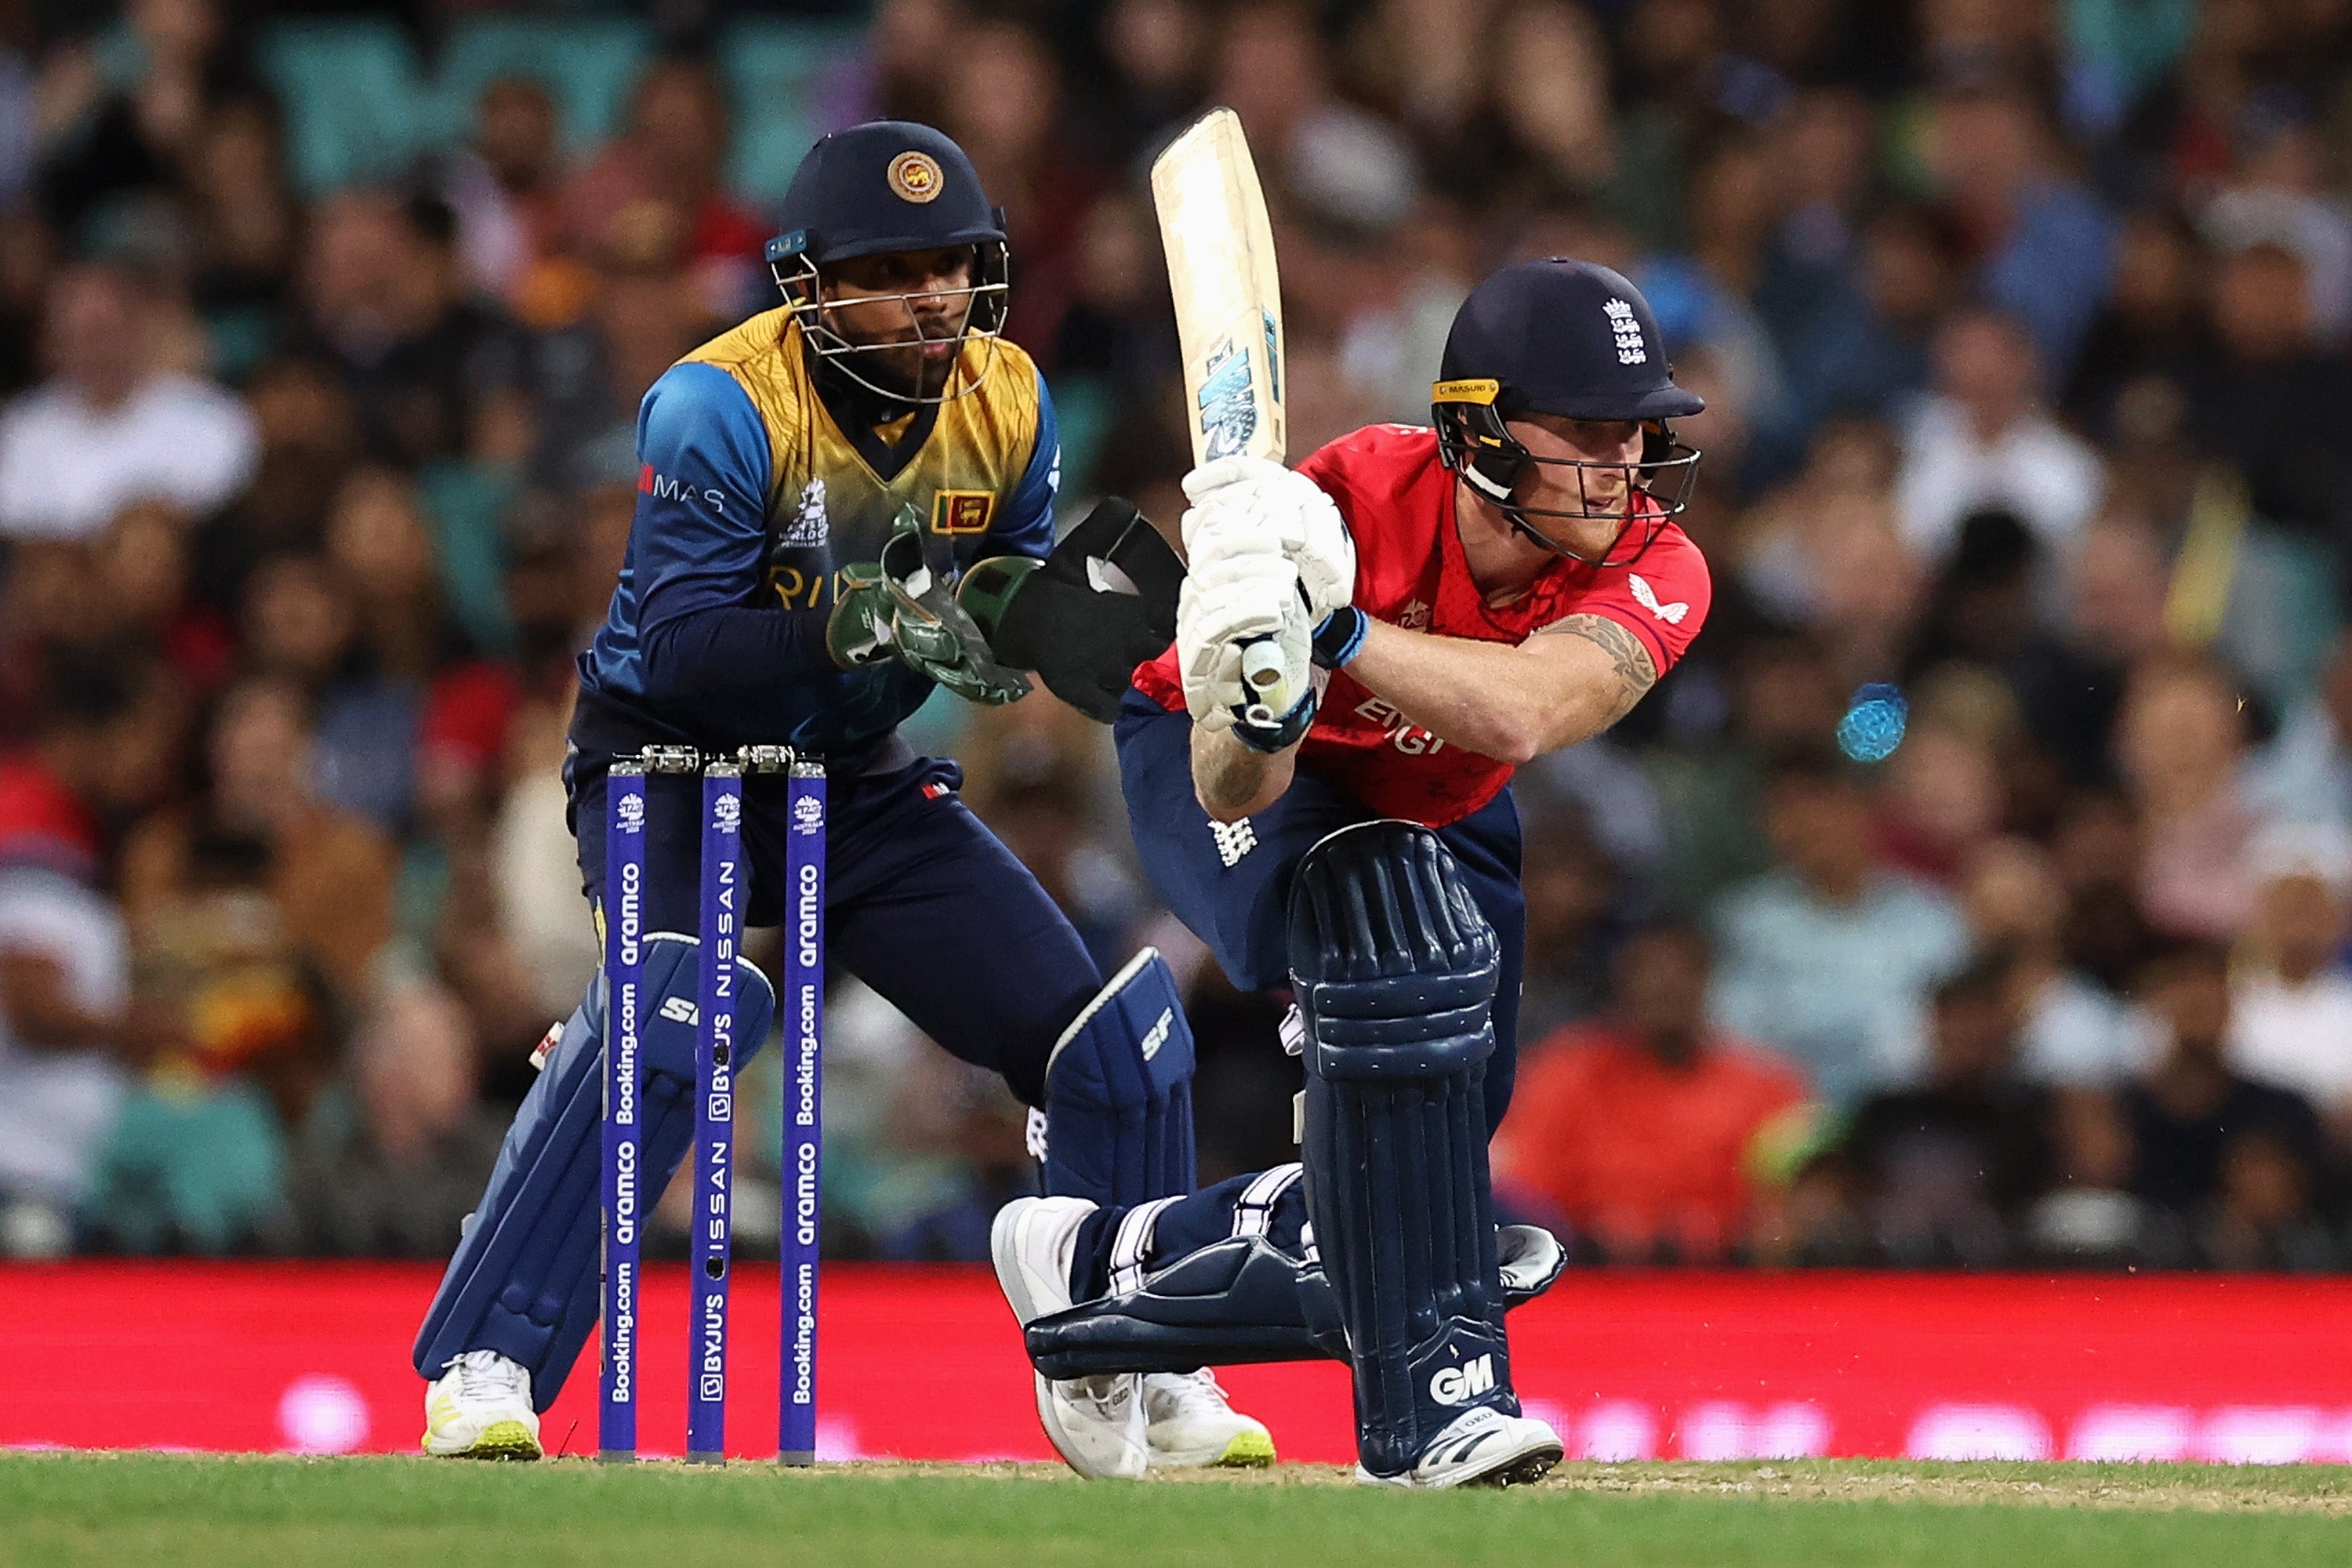 An unbeaten 42 off 36 balls from Ben Stokes saw England to a narrow victory over Sri Lanka